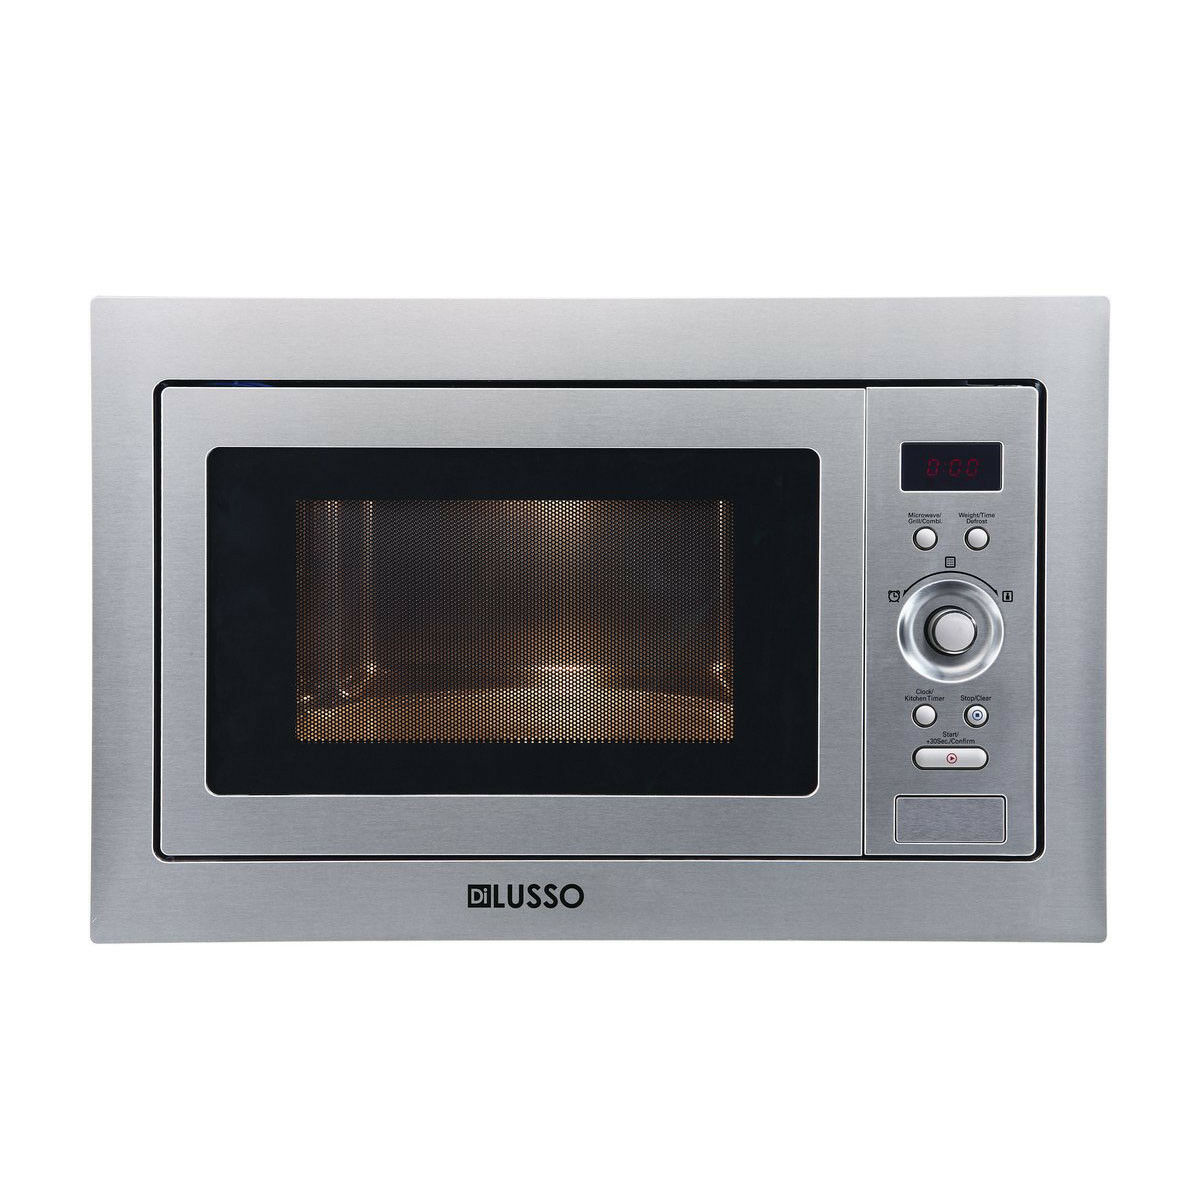 595*388*440mm Built In Microwave with Grill Stainless Steel Finish 900W